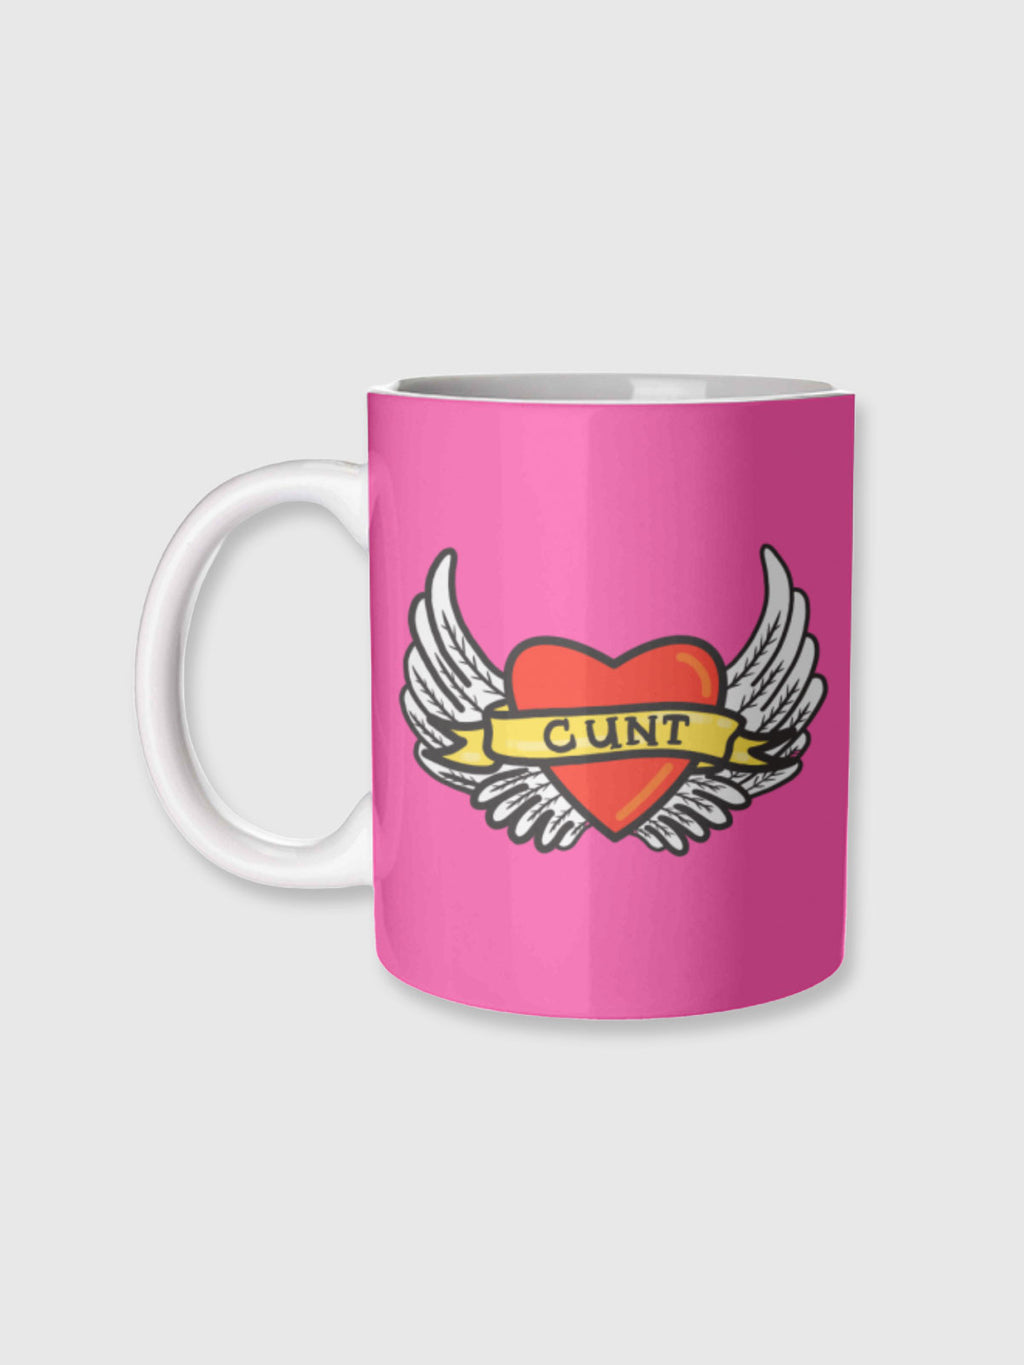 Cup / Mug - Cunt - Pink with Winged Heart